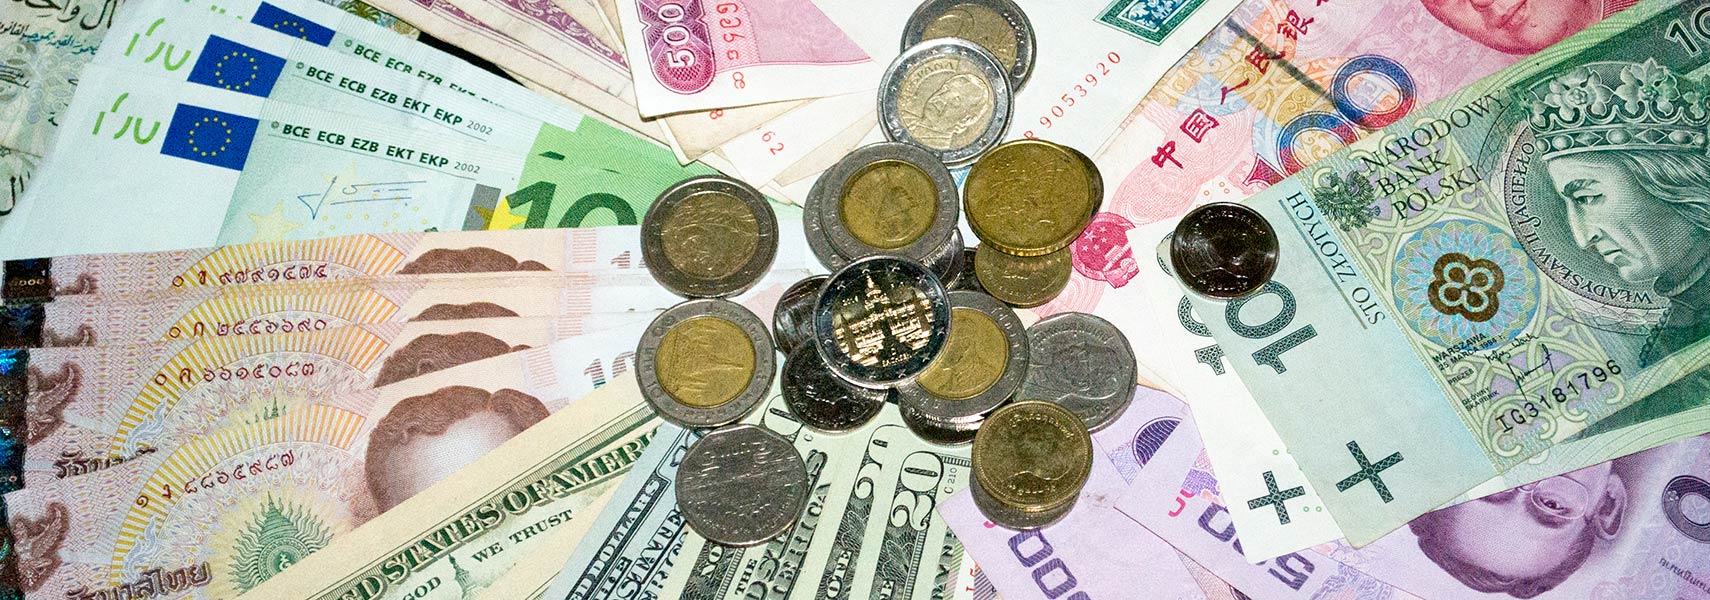 International Currencies, banknotes and coins